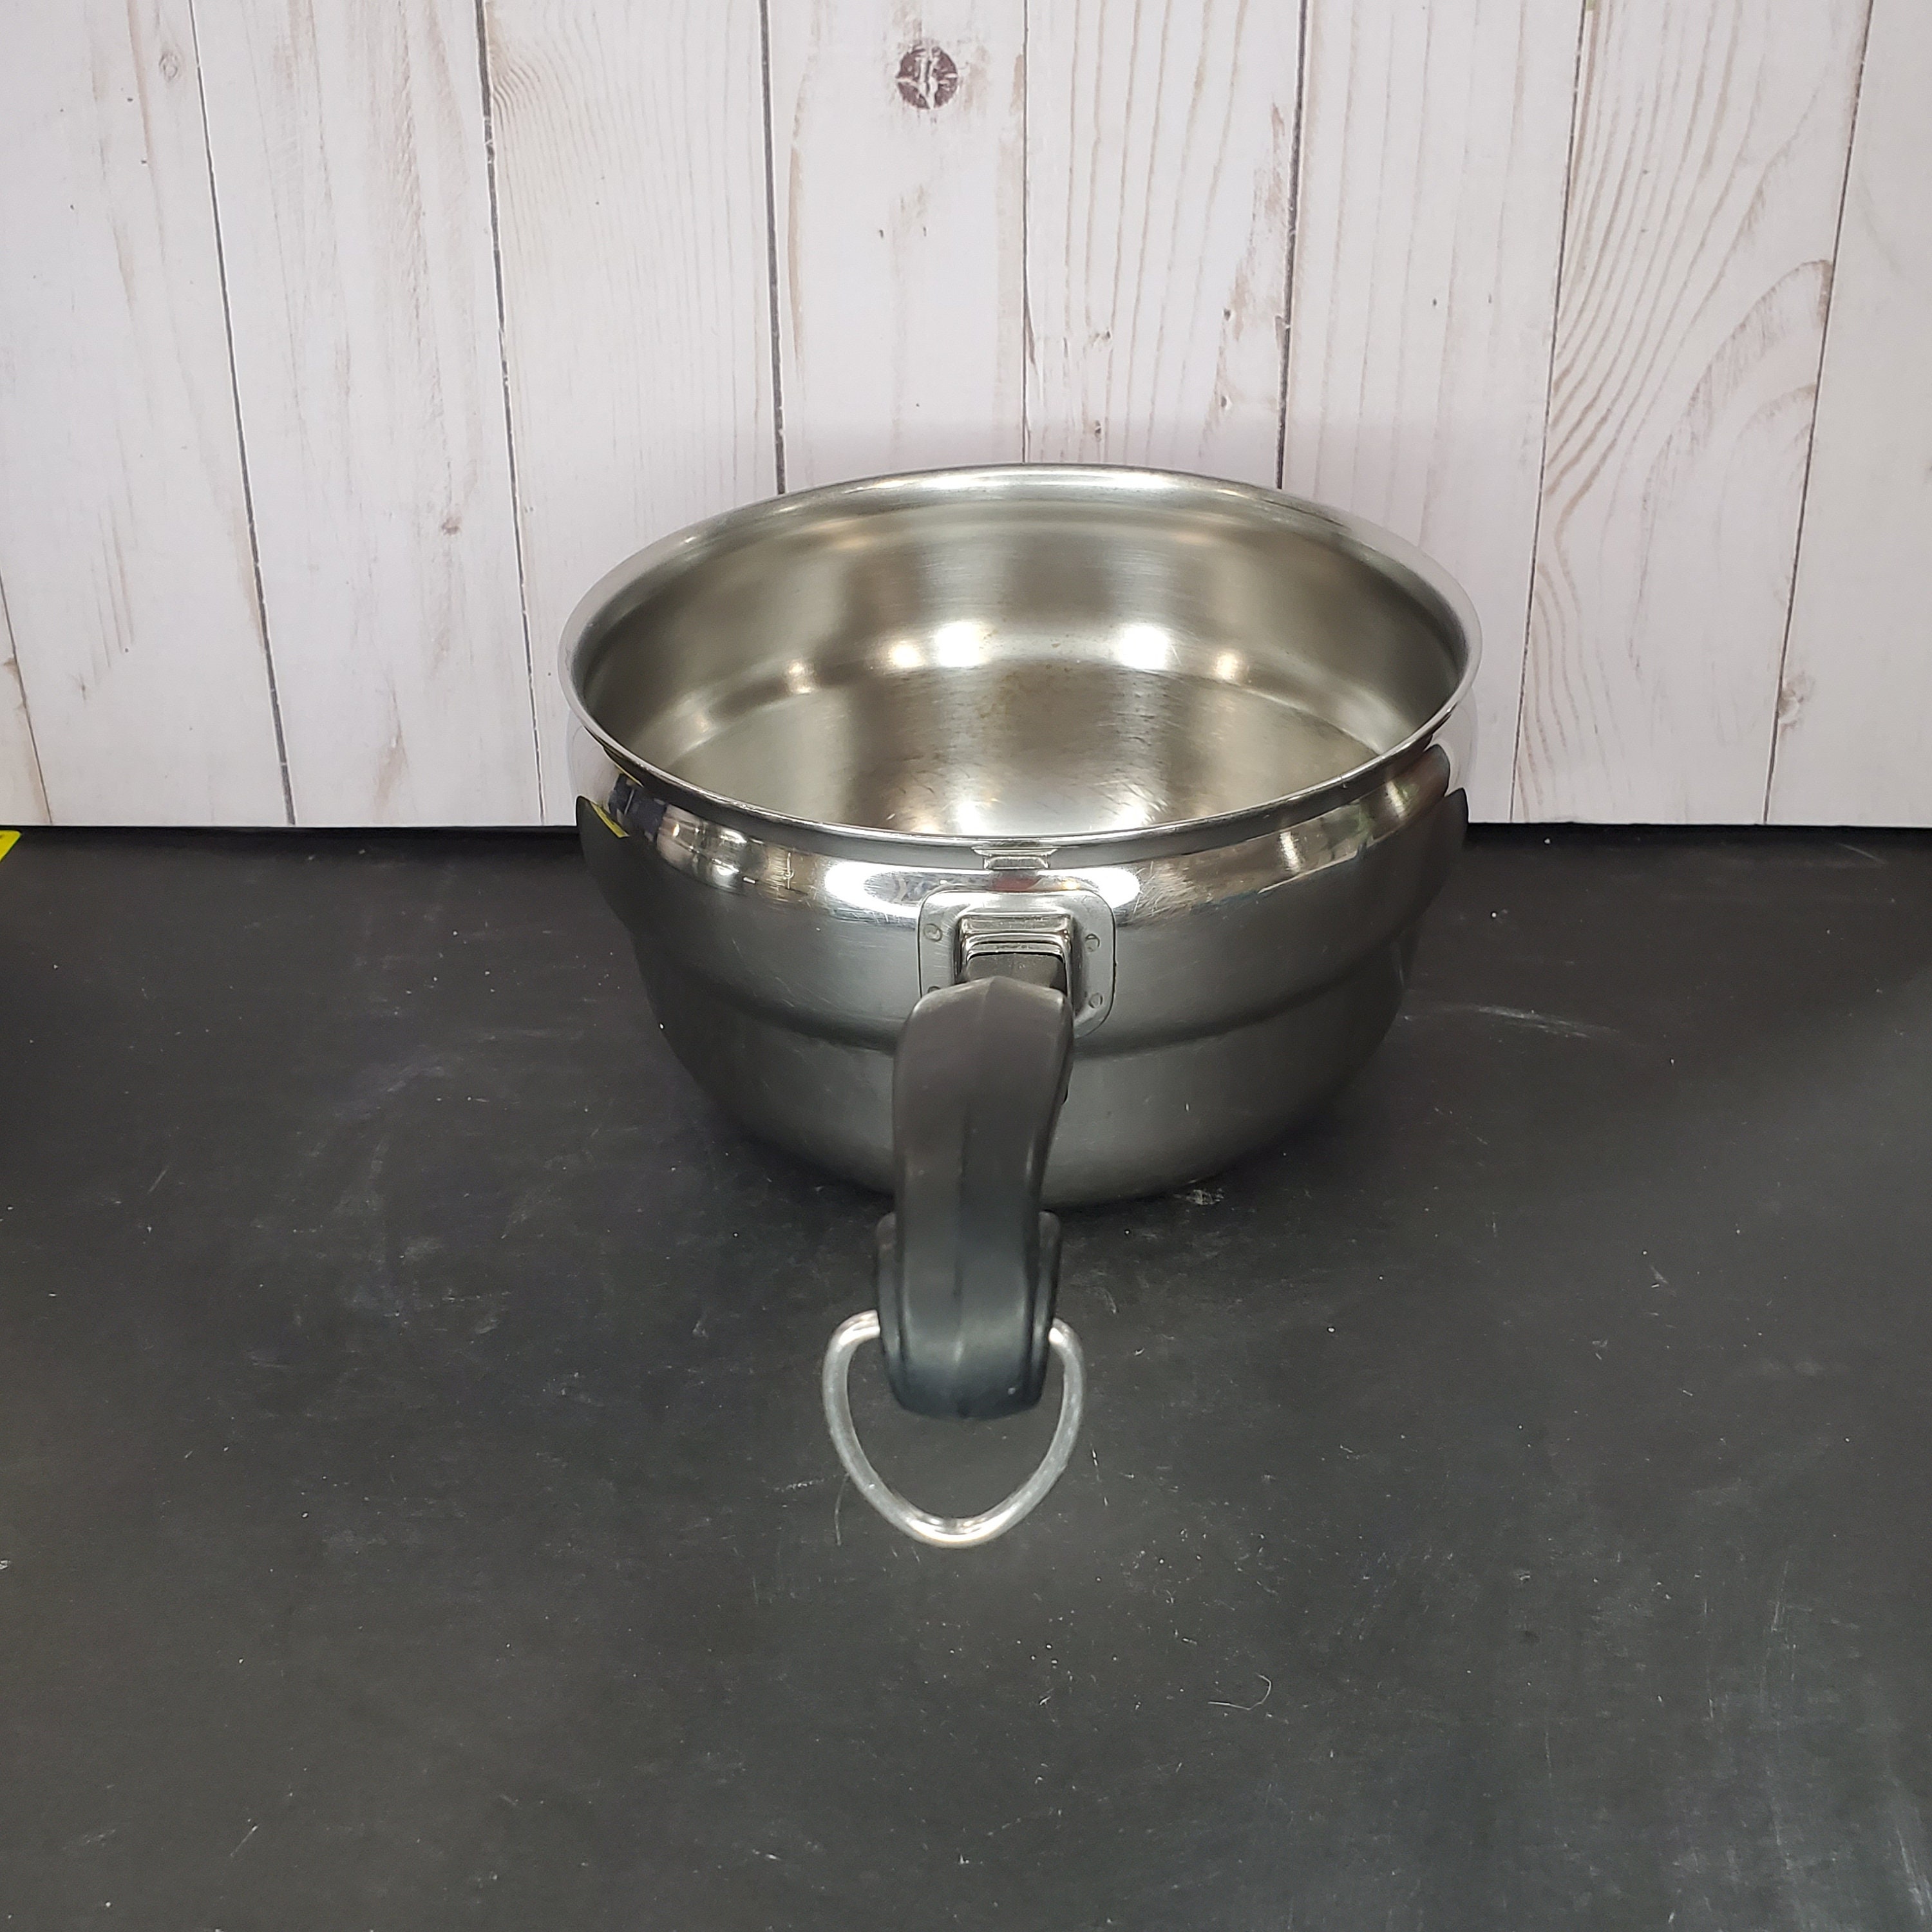 Vintage Farberware Double Boiler, Bottom Reads Aluminum Clad/stainless  Steel, 2 1/2 Qt, 3 Pieces 